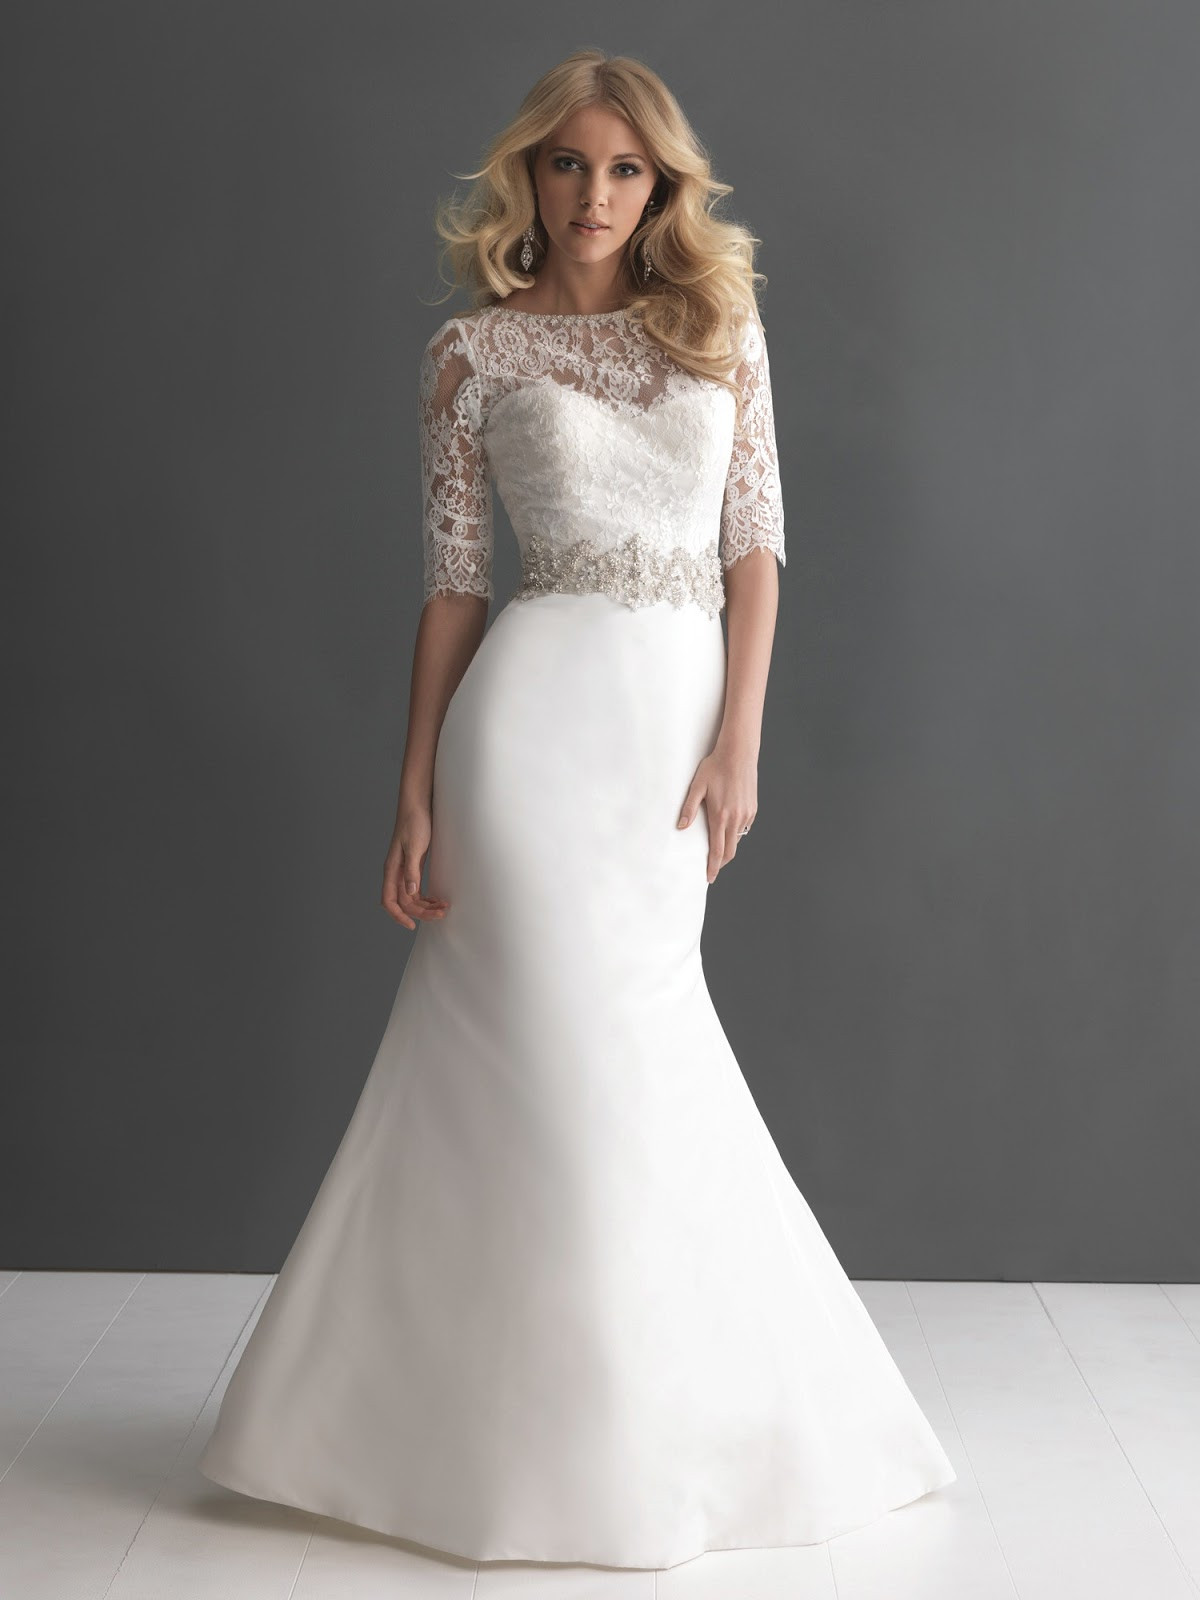 Wedding Dress With Lace Sleeves
 DressyBridal Allure Wedding Dresses Fall 2013 Collection